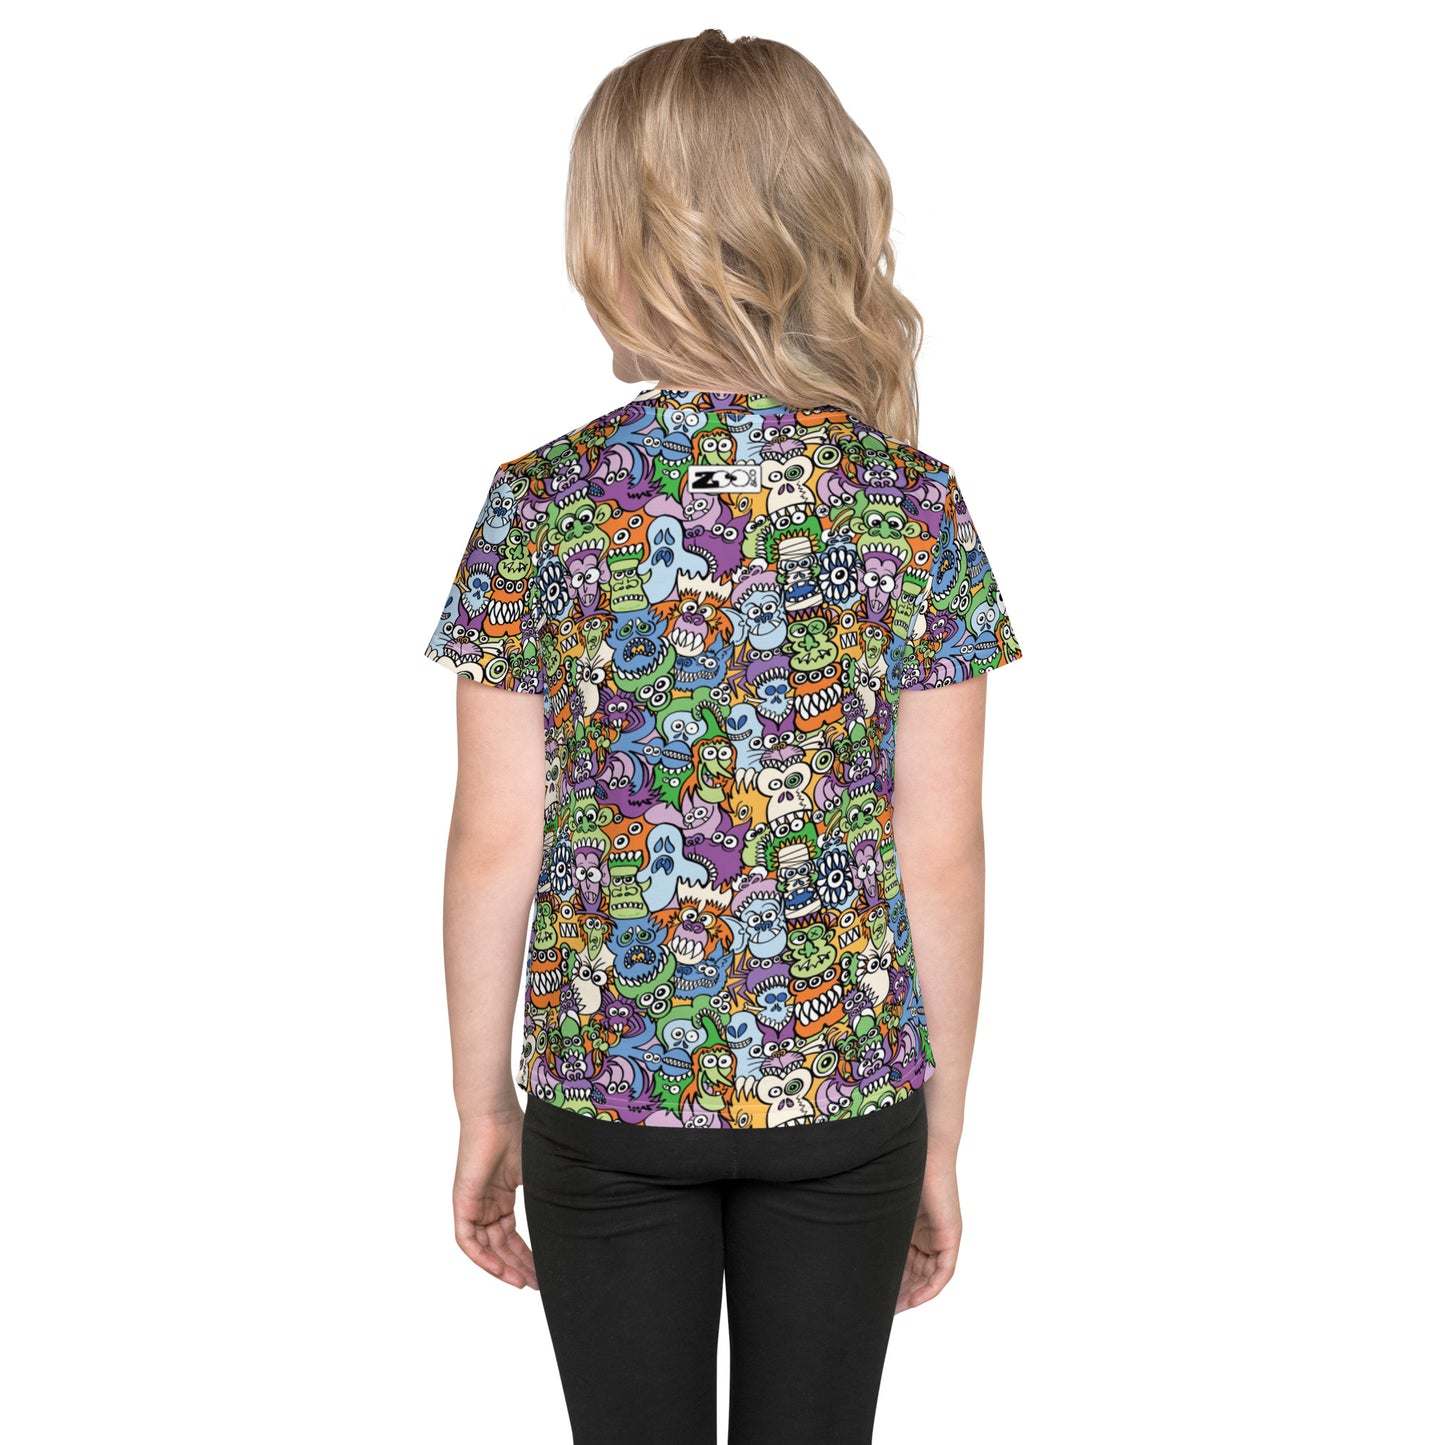 All the spooky Halloween monsters in a pattern design Kids crew neck t-shirt. Back view